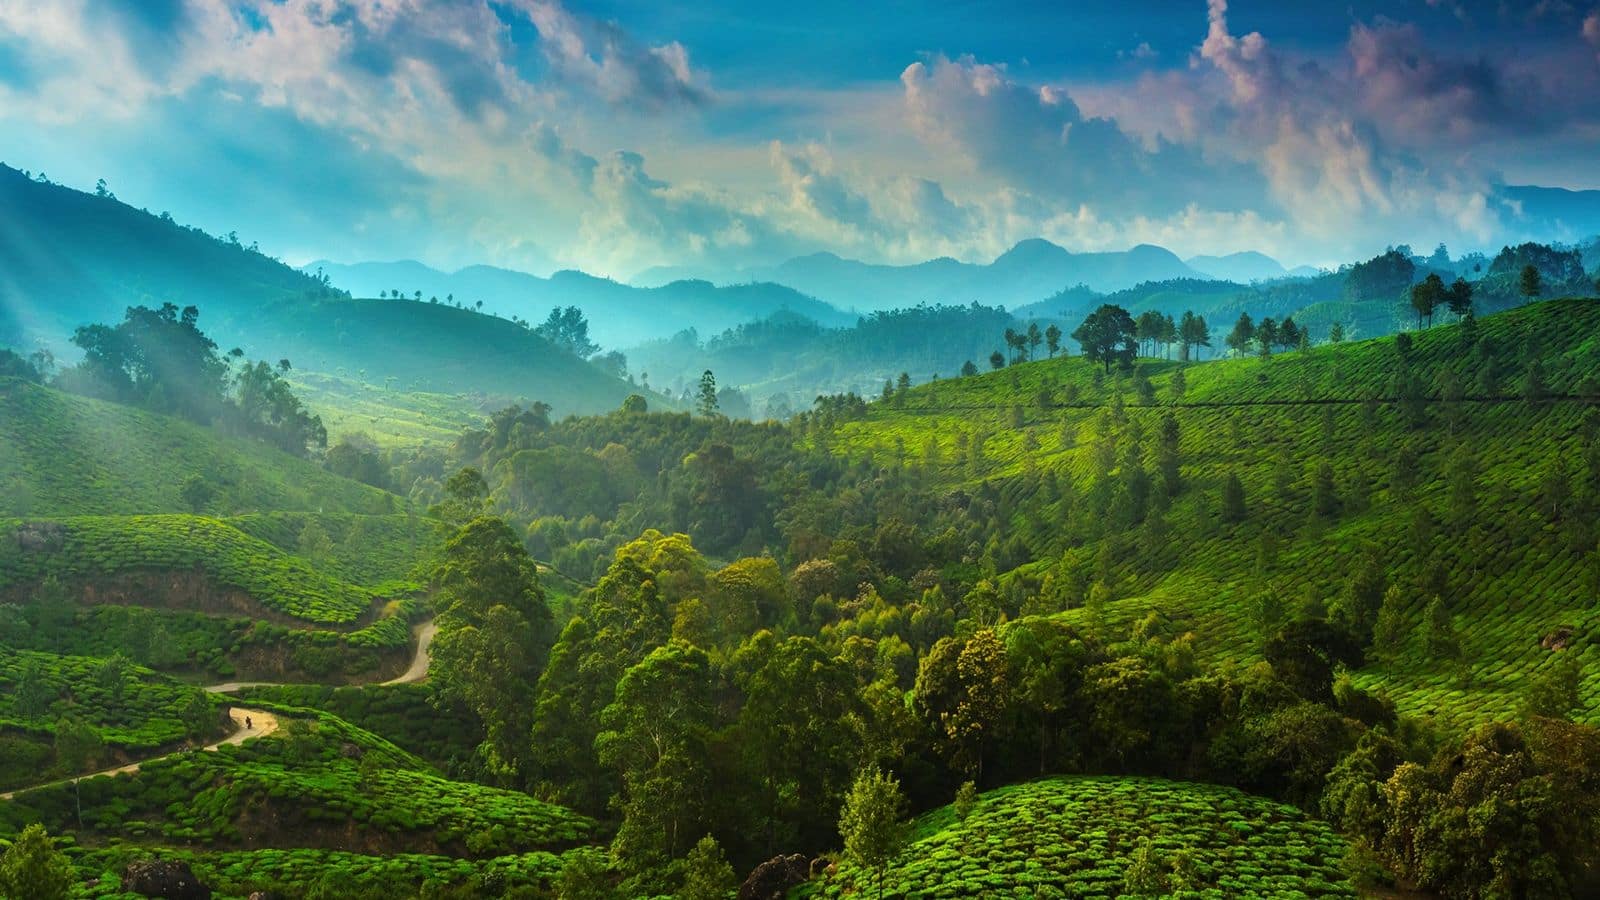 Munnar, India is a haven of tea gardens and serenity